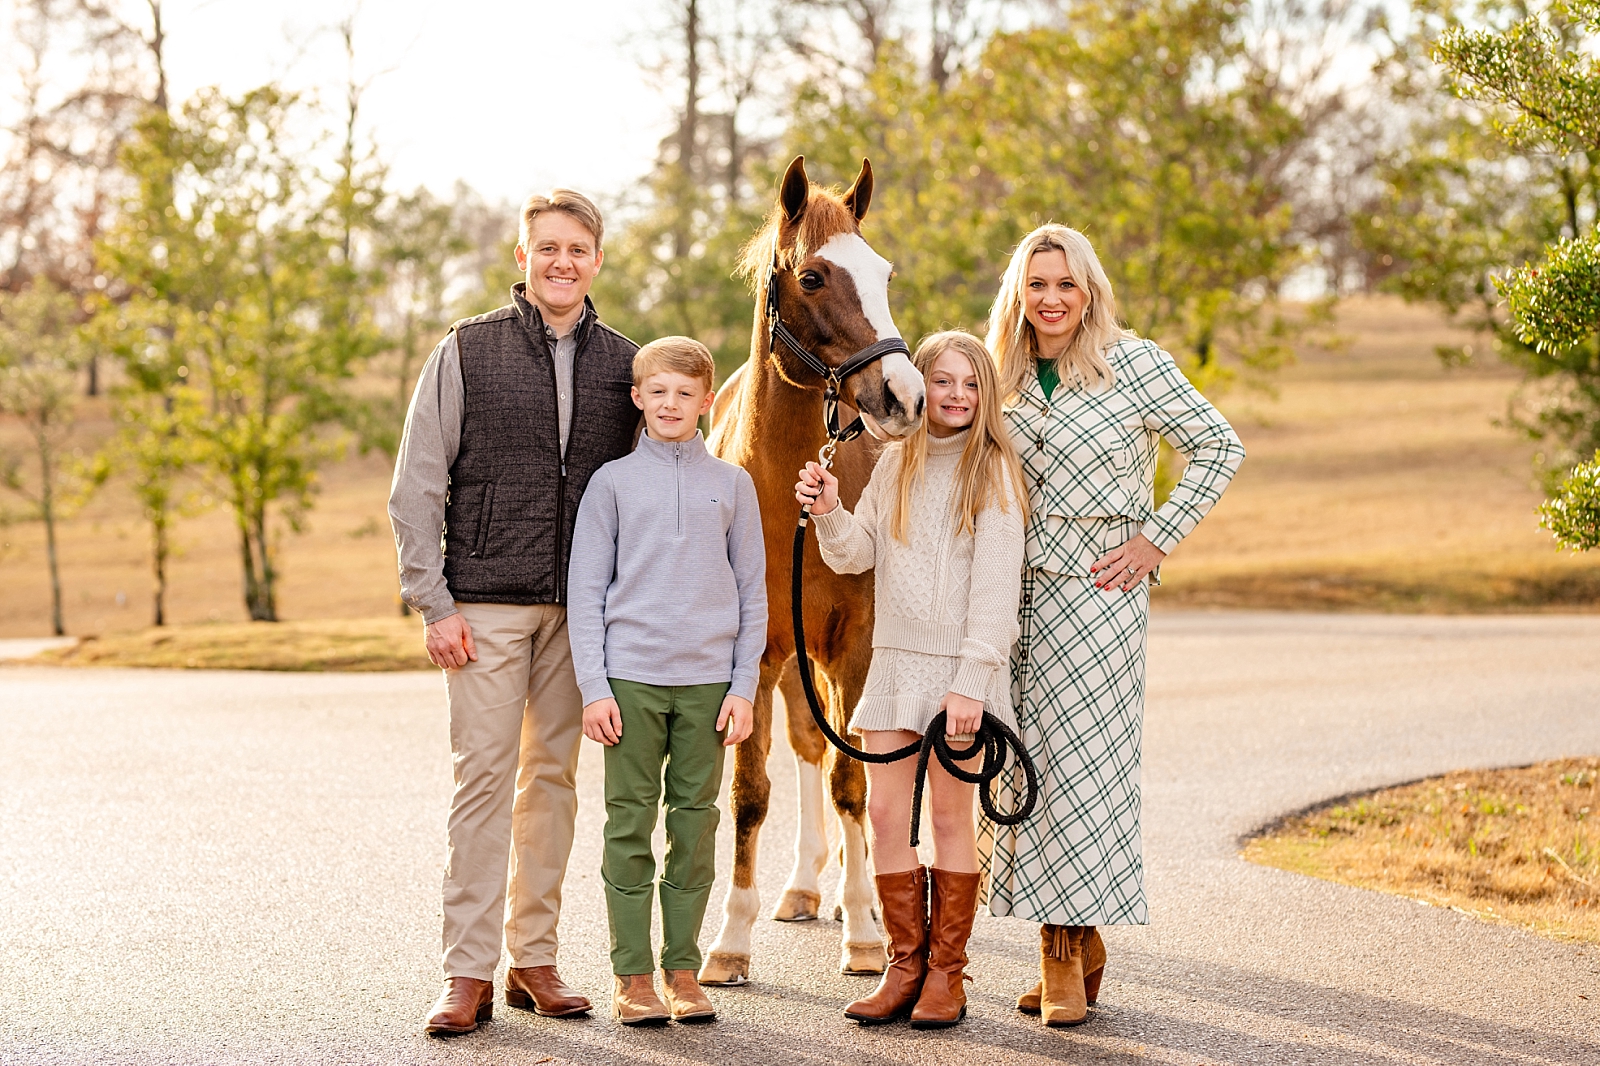 Equestrian family photography. Family photos with horses. Girl and her pony. Winter equine photoshoot.